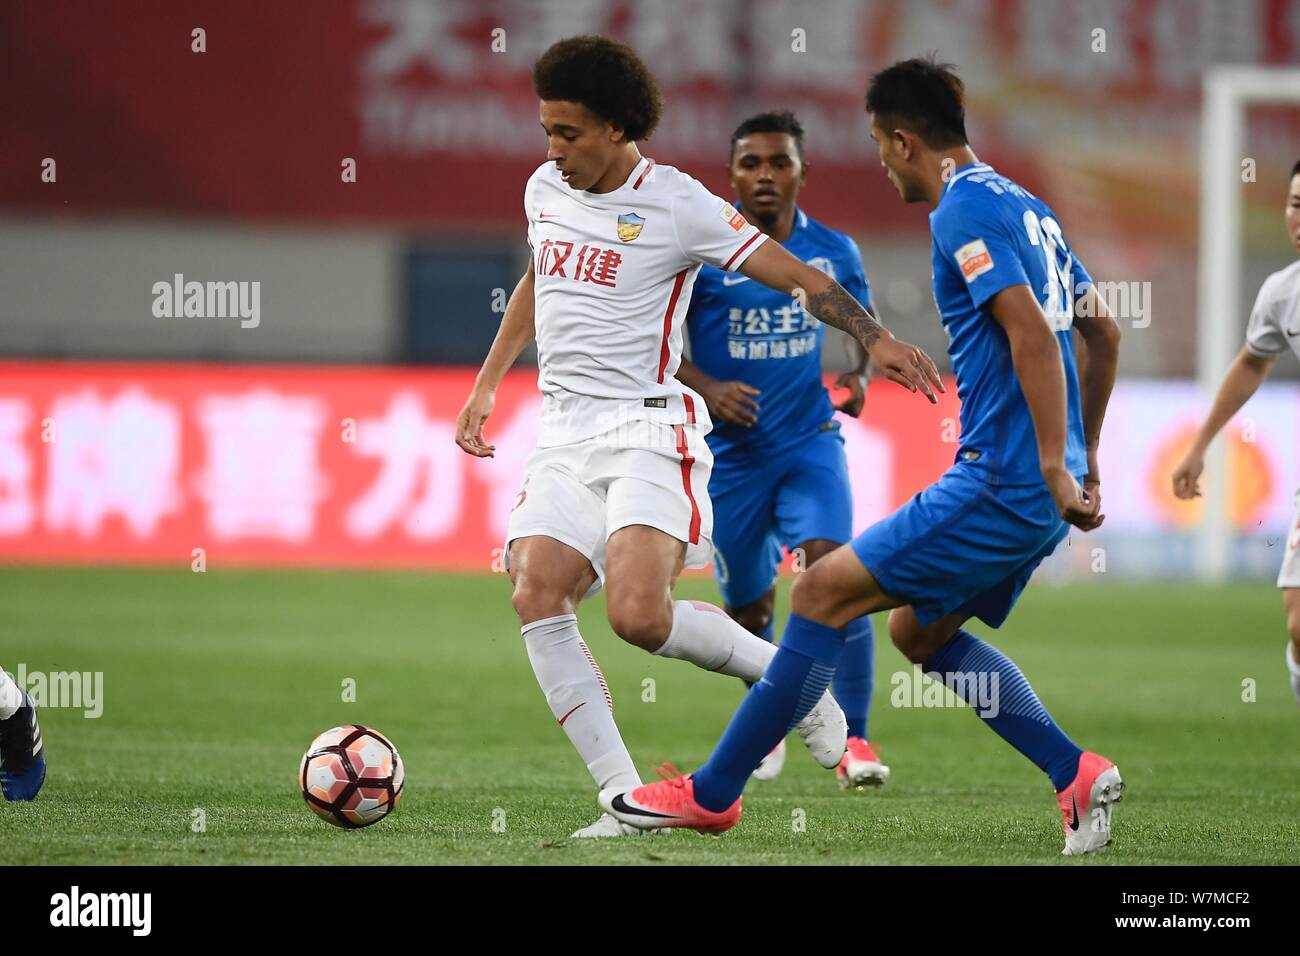 Belgian football player Axel Witsel, left, of Tianjin Quanjian, challenges a player of Guangzhou R&F in their 16th round match during the 2017 Chinese Stock Photo